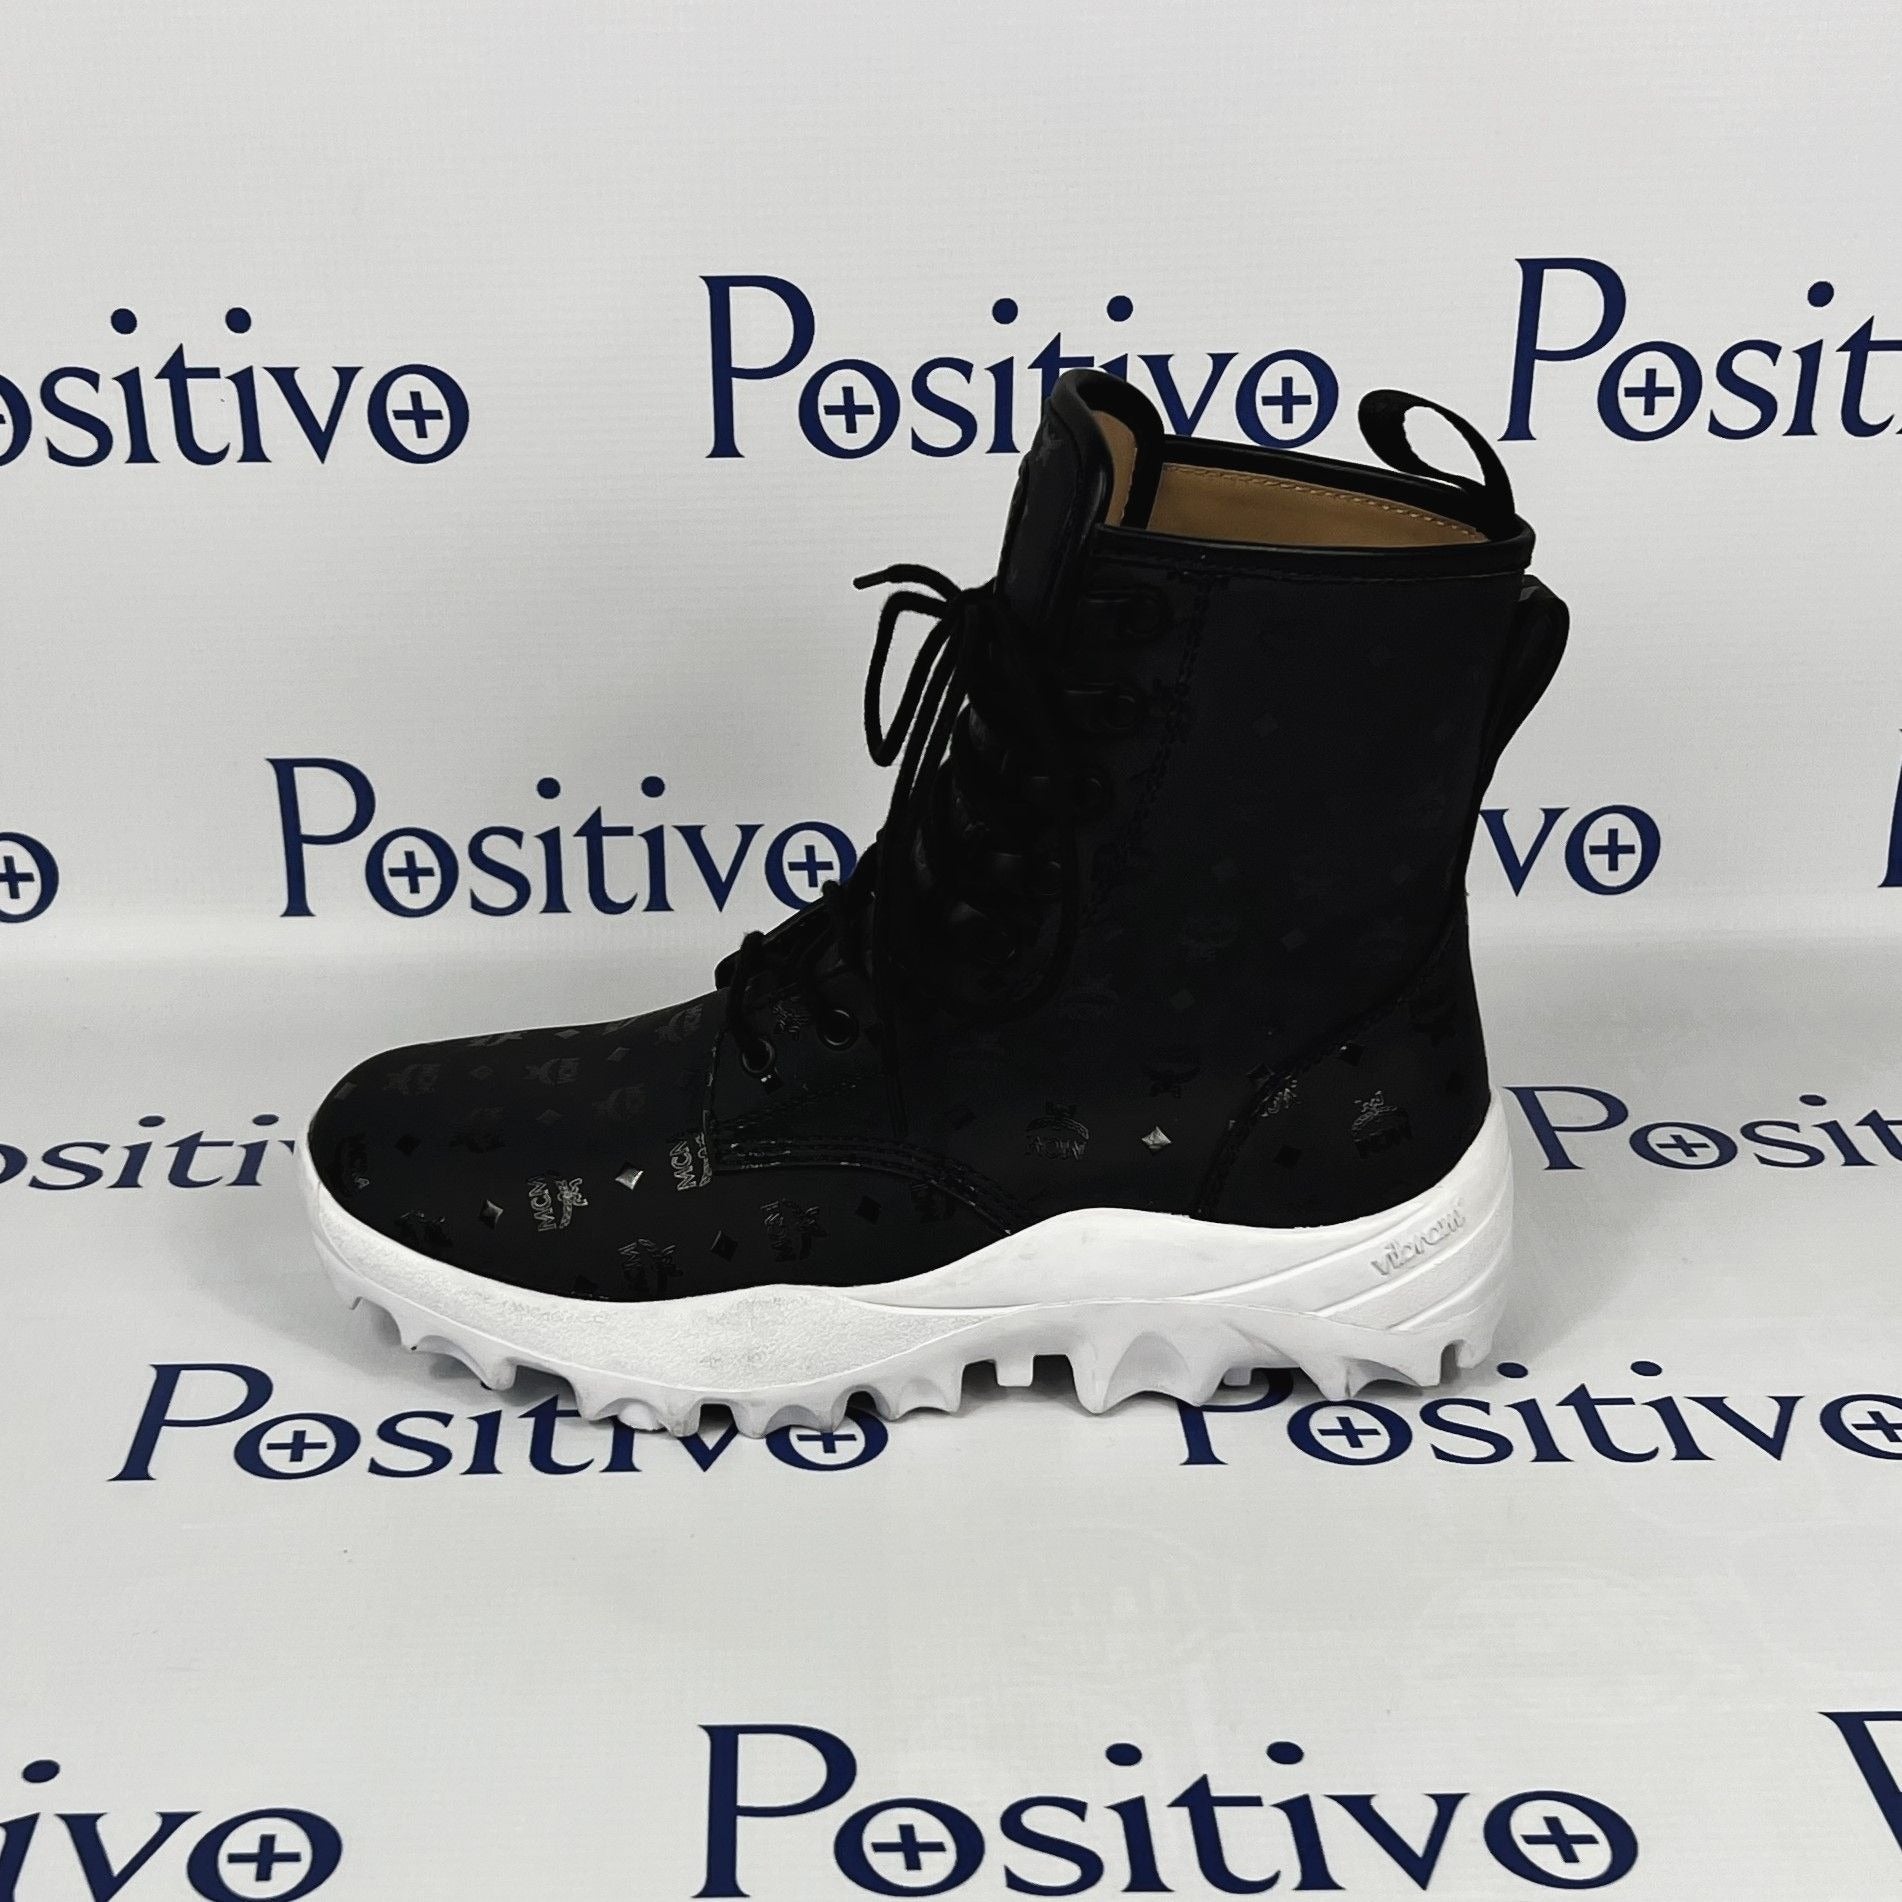 MCM Boots Black/White Leather Ankle Boots | Positivo Clothing